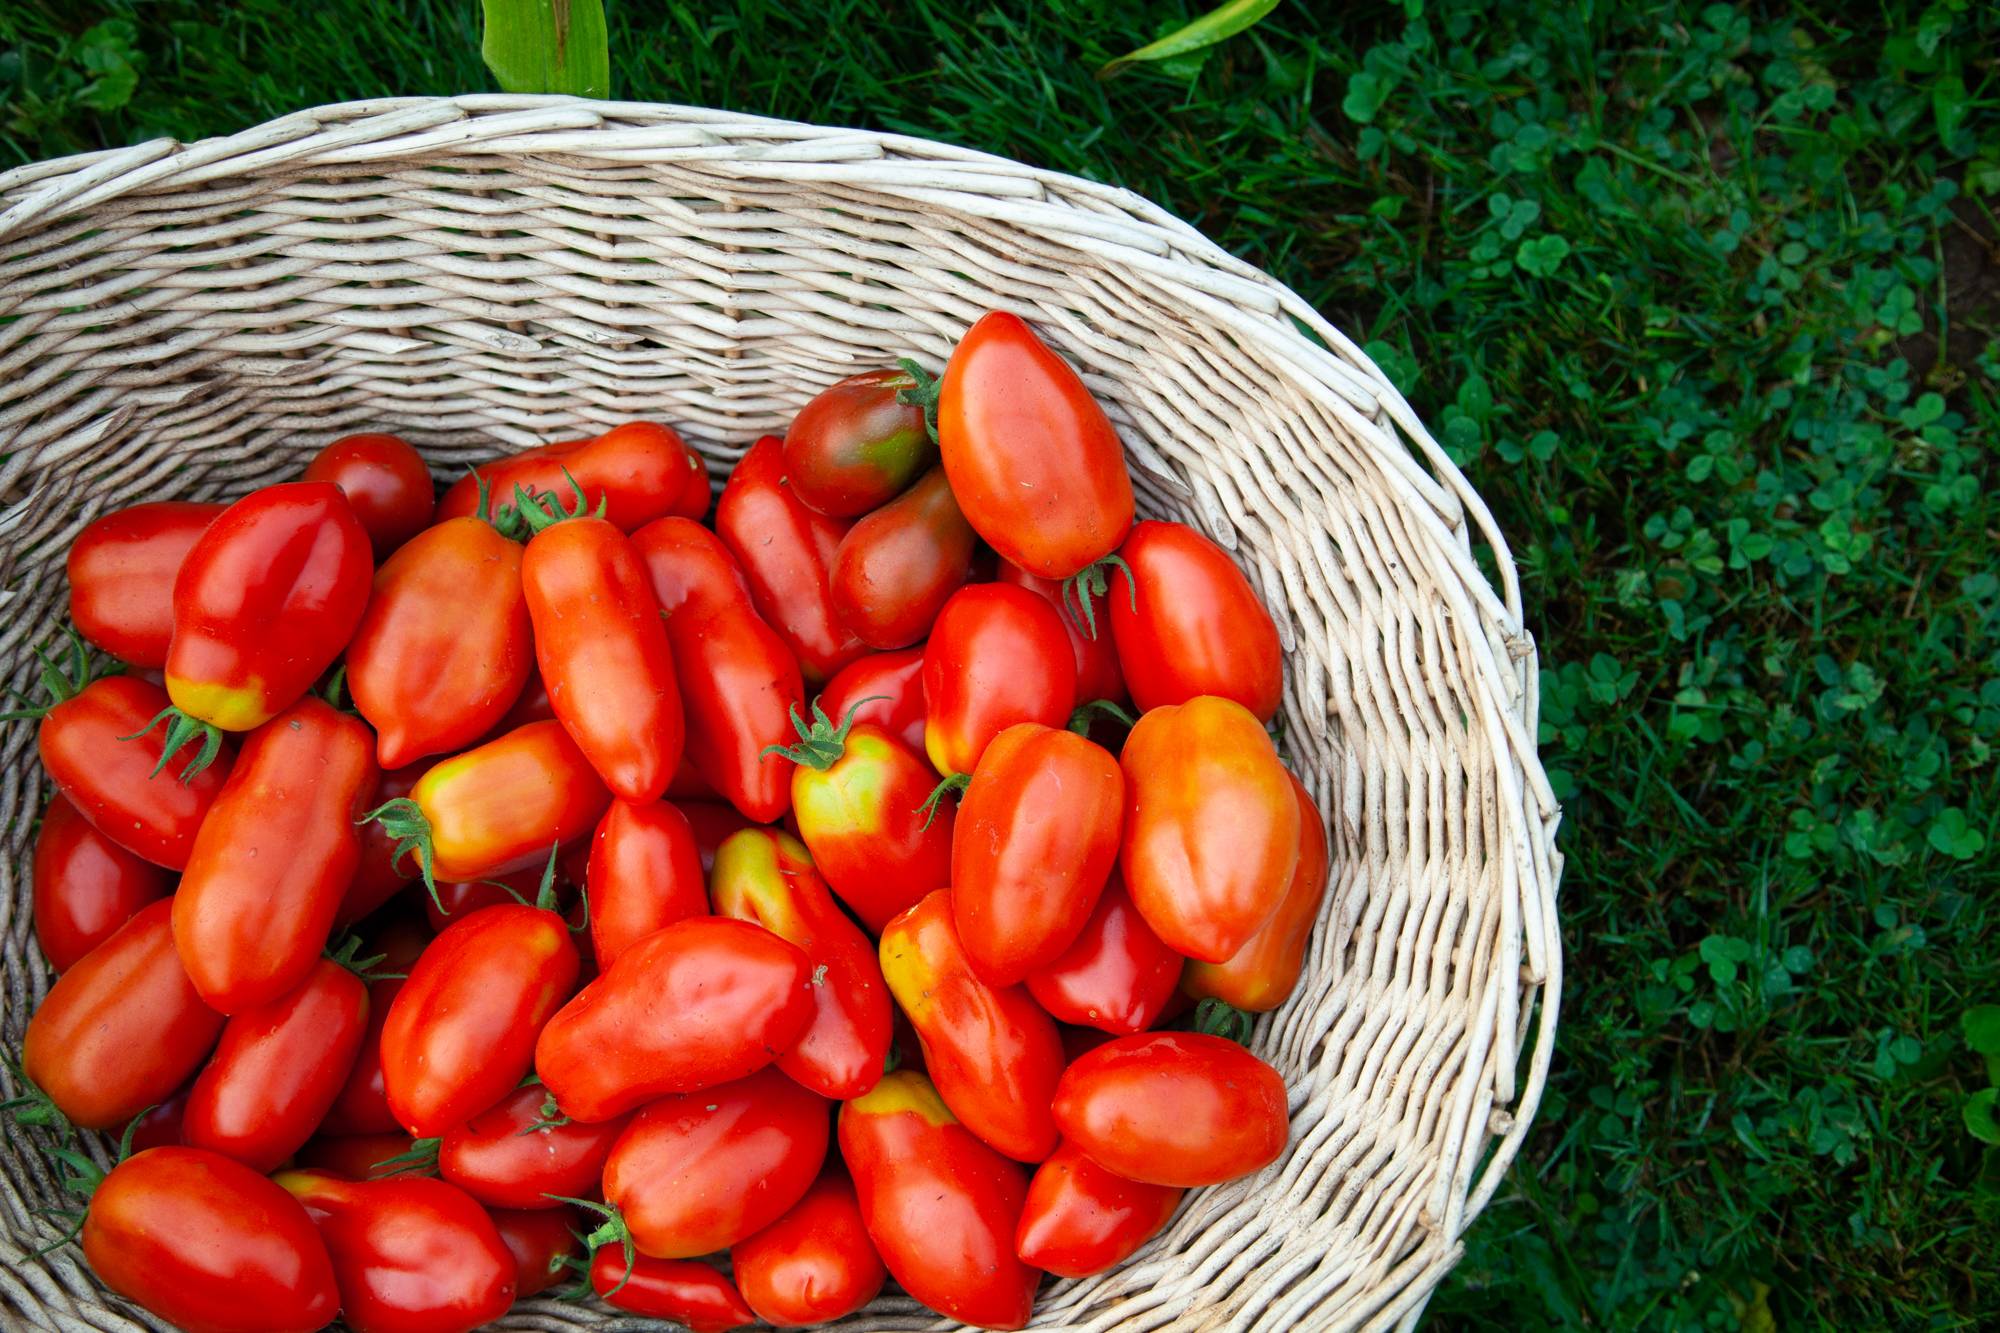 homegrown ripe paste tomatoes in a wicker basket on the grass